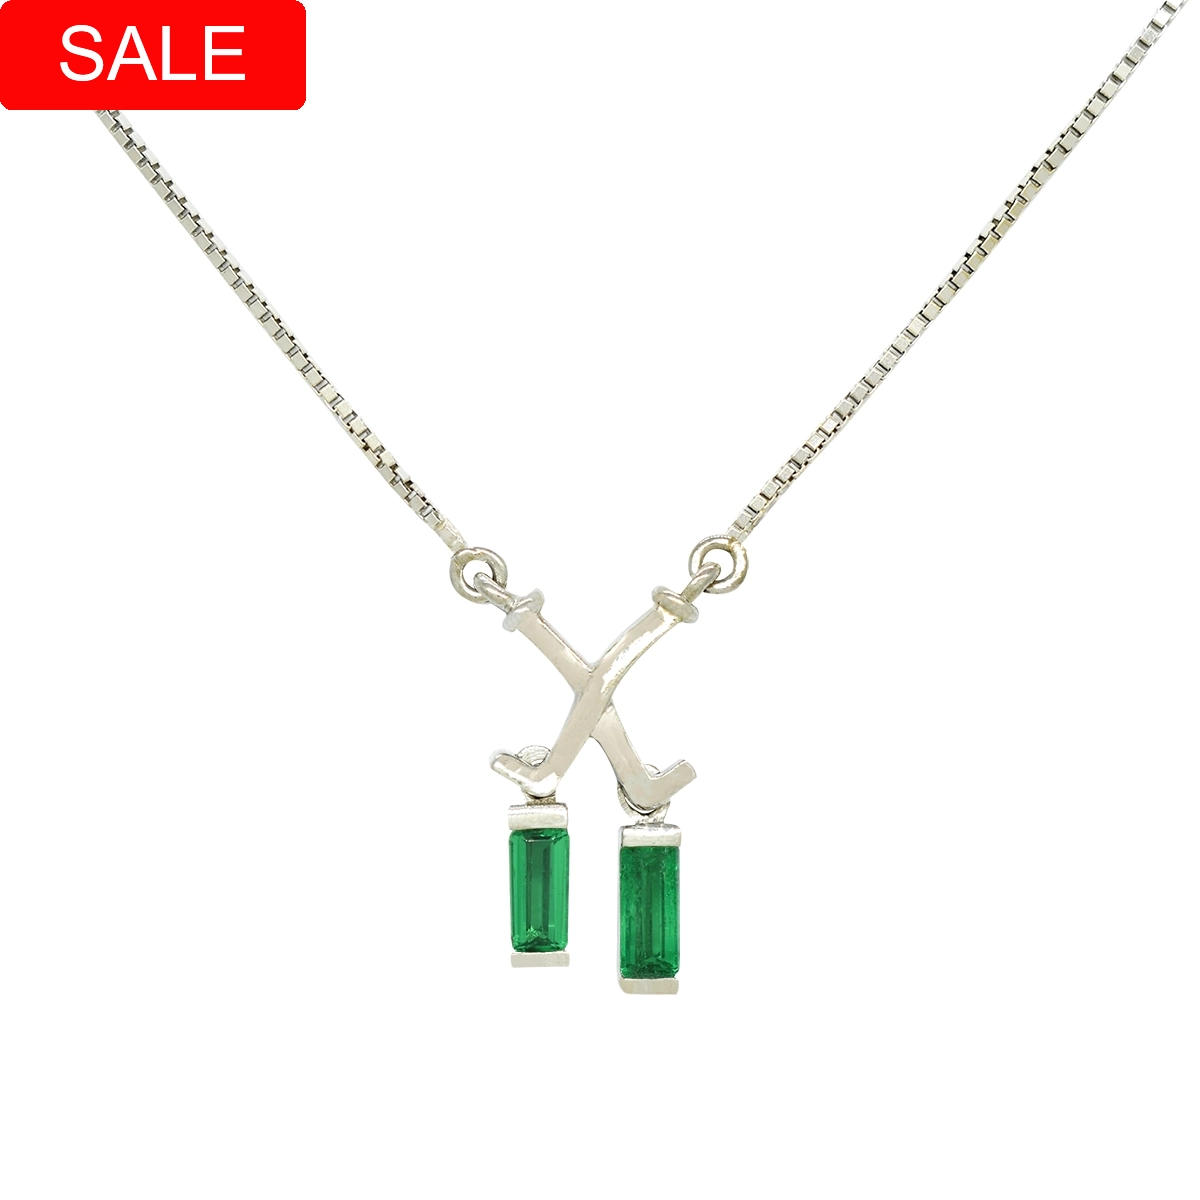 Emerald Necklace in 18K White Gold with 2 Baguette Cut Natural Colombian Emeralds